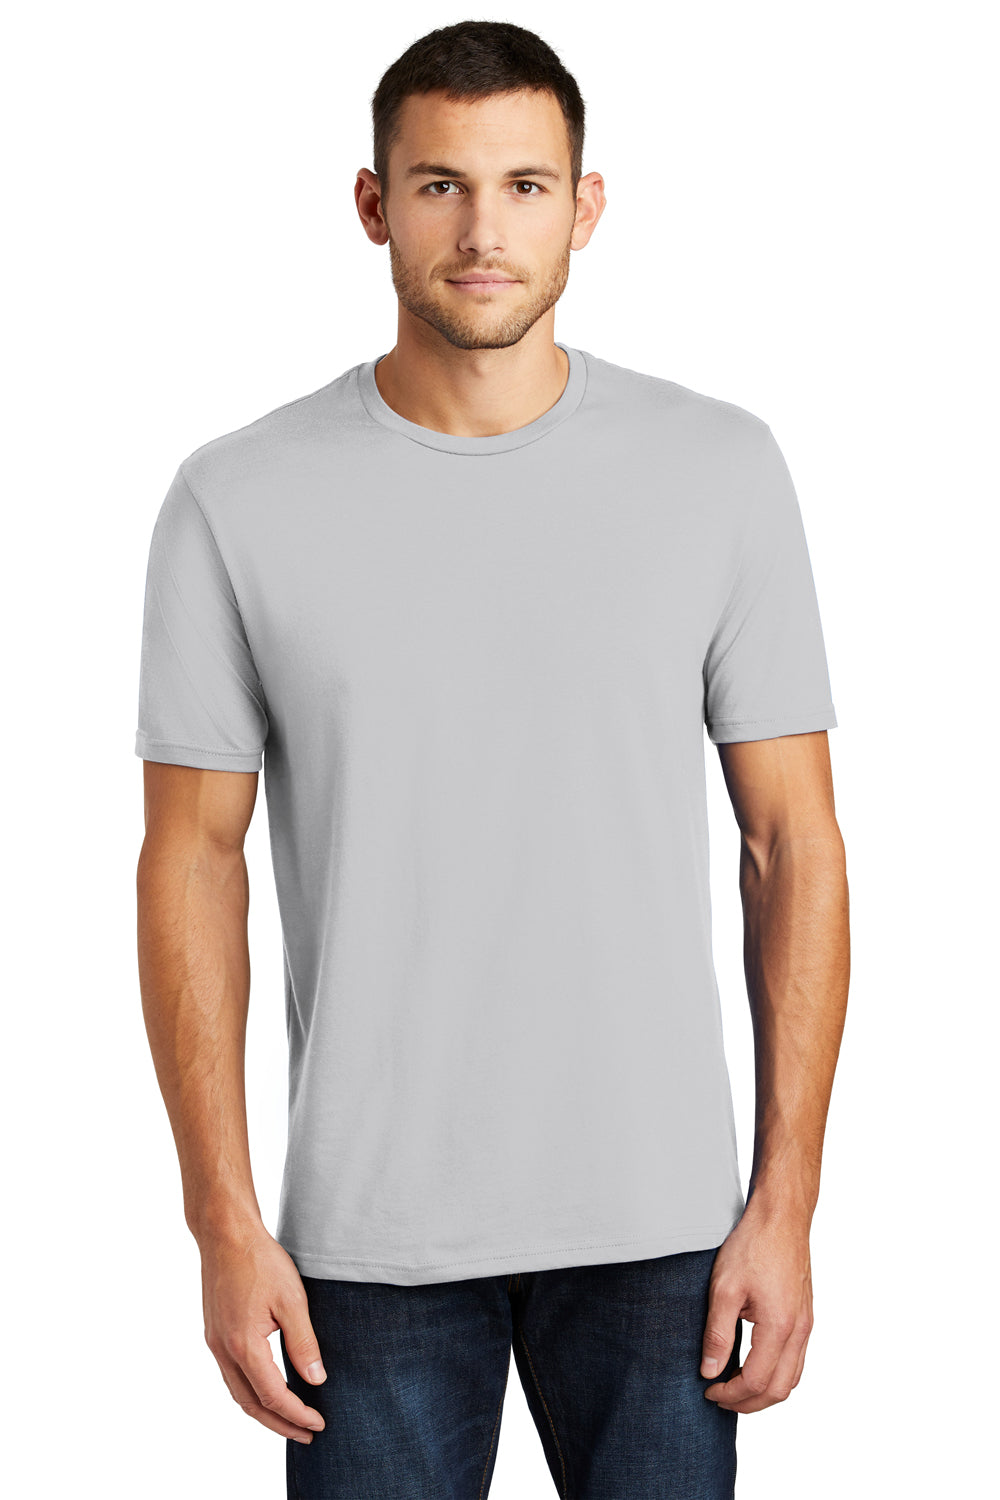 District DT104 Mens Perfect Weight Short Sleeve Crewneck T-Shirt Silver Grey Front